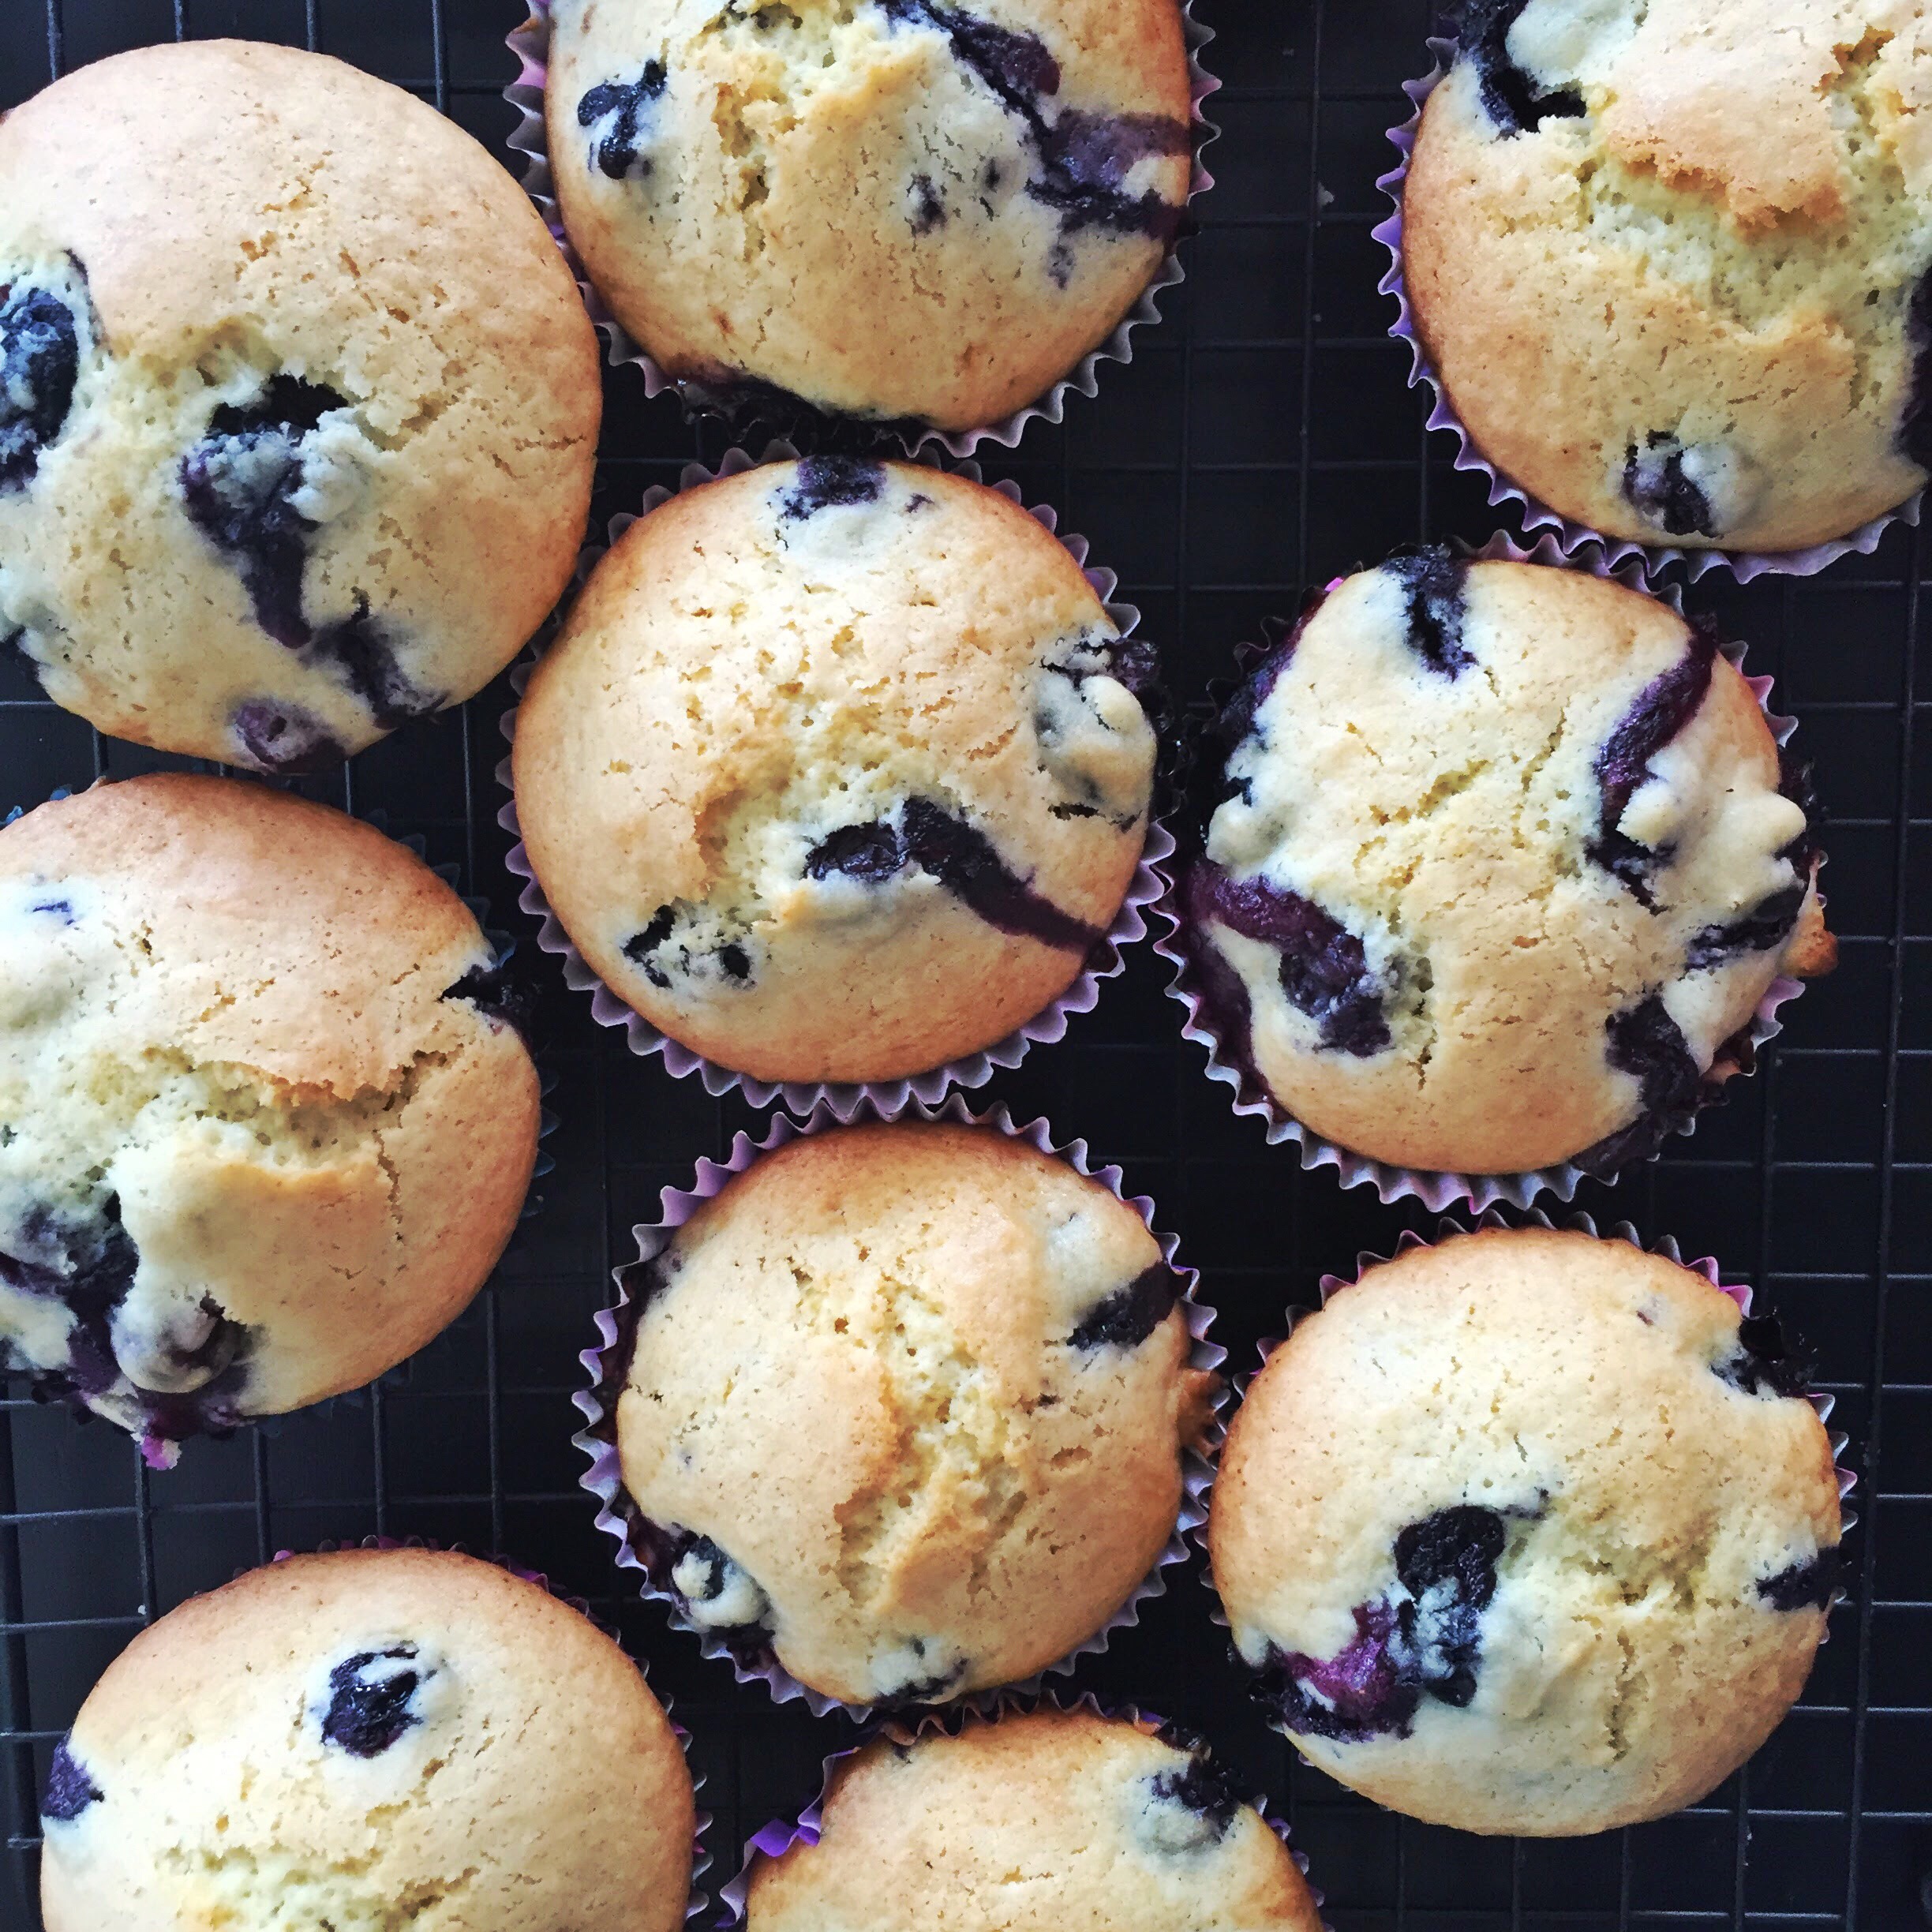 Blueberry Muffin Recipe Using Canned Blueberries